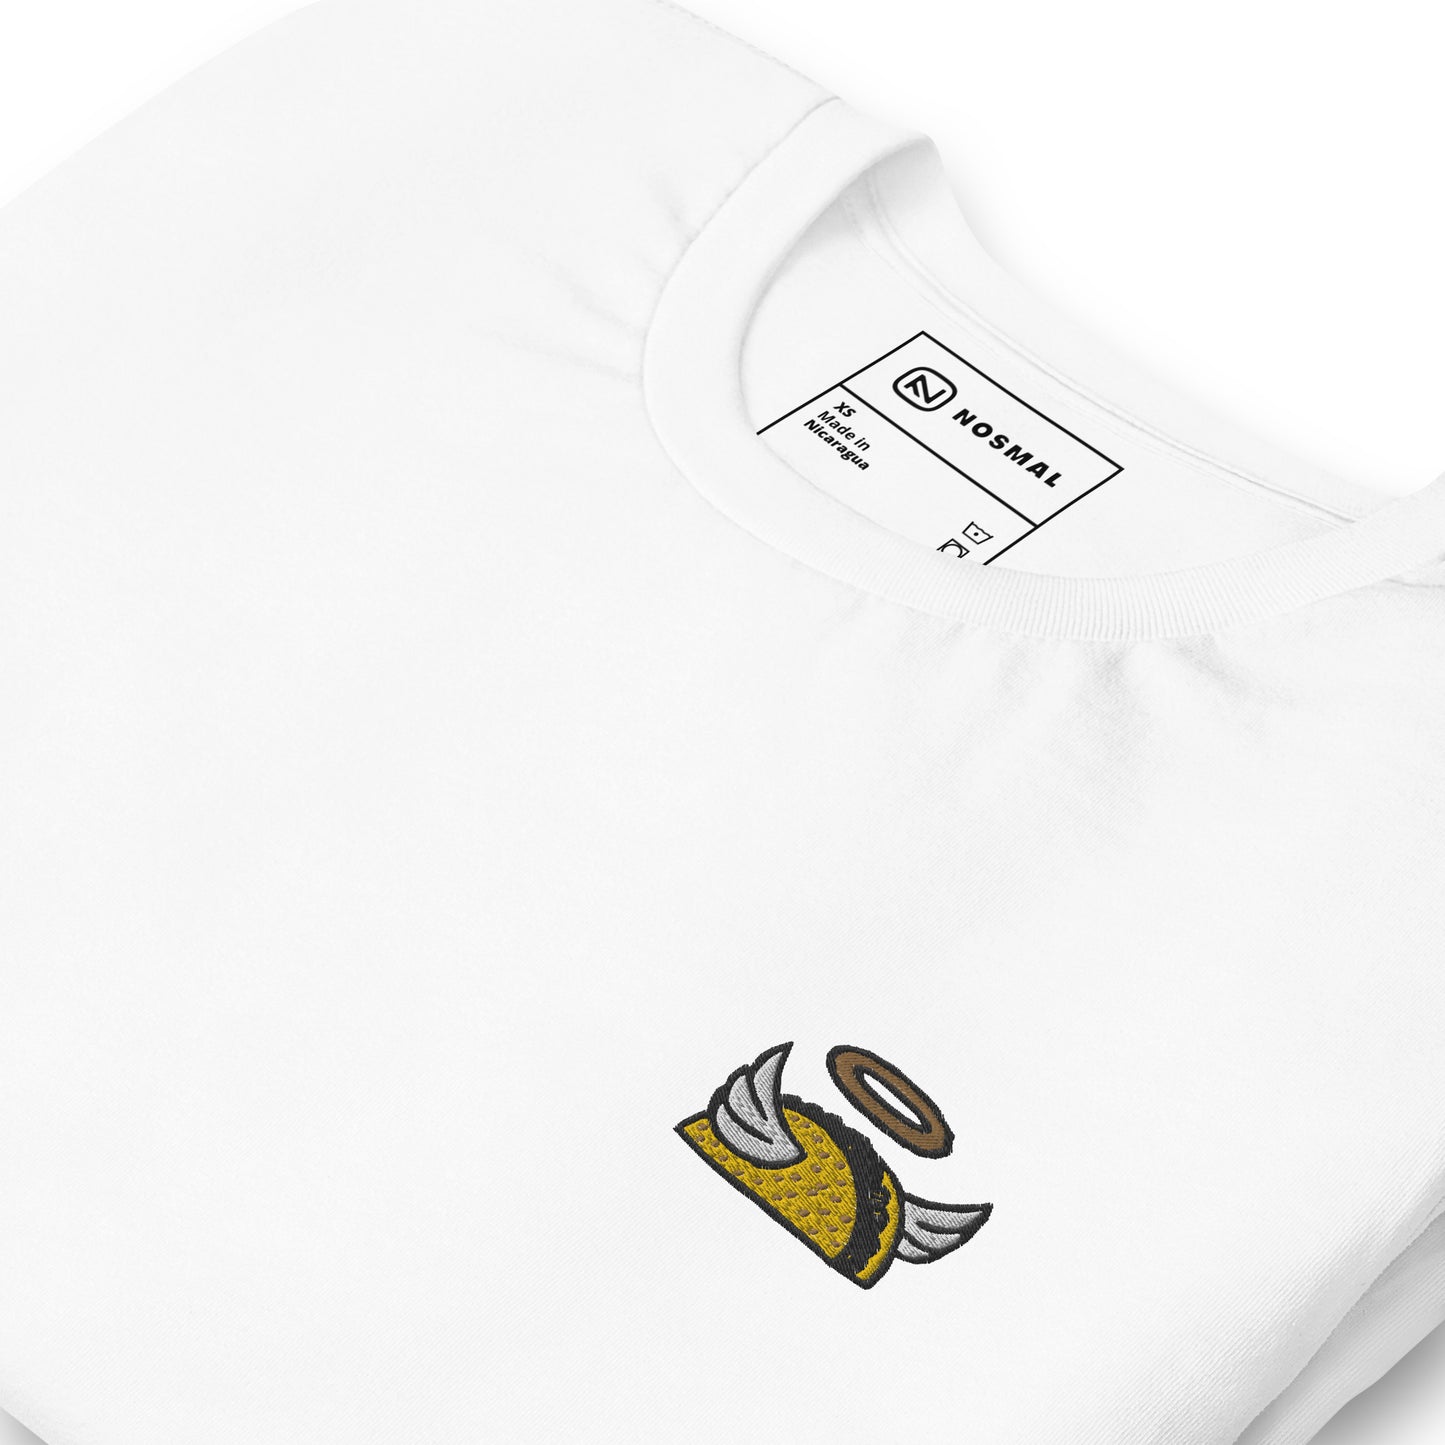 Angled close up holy taco club embroidered design on white unisex t-shirt.